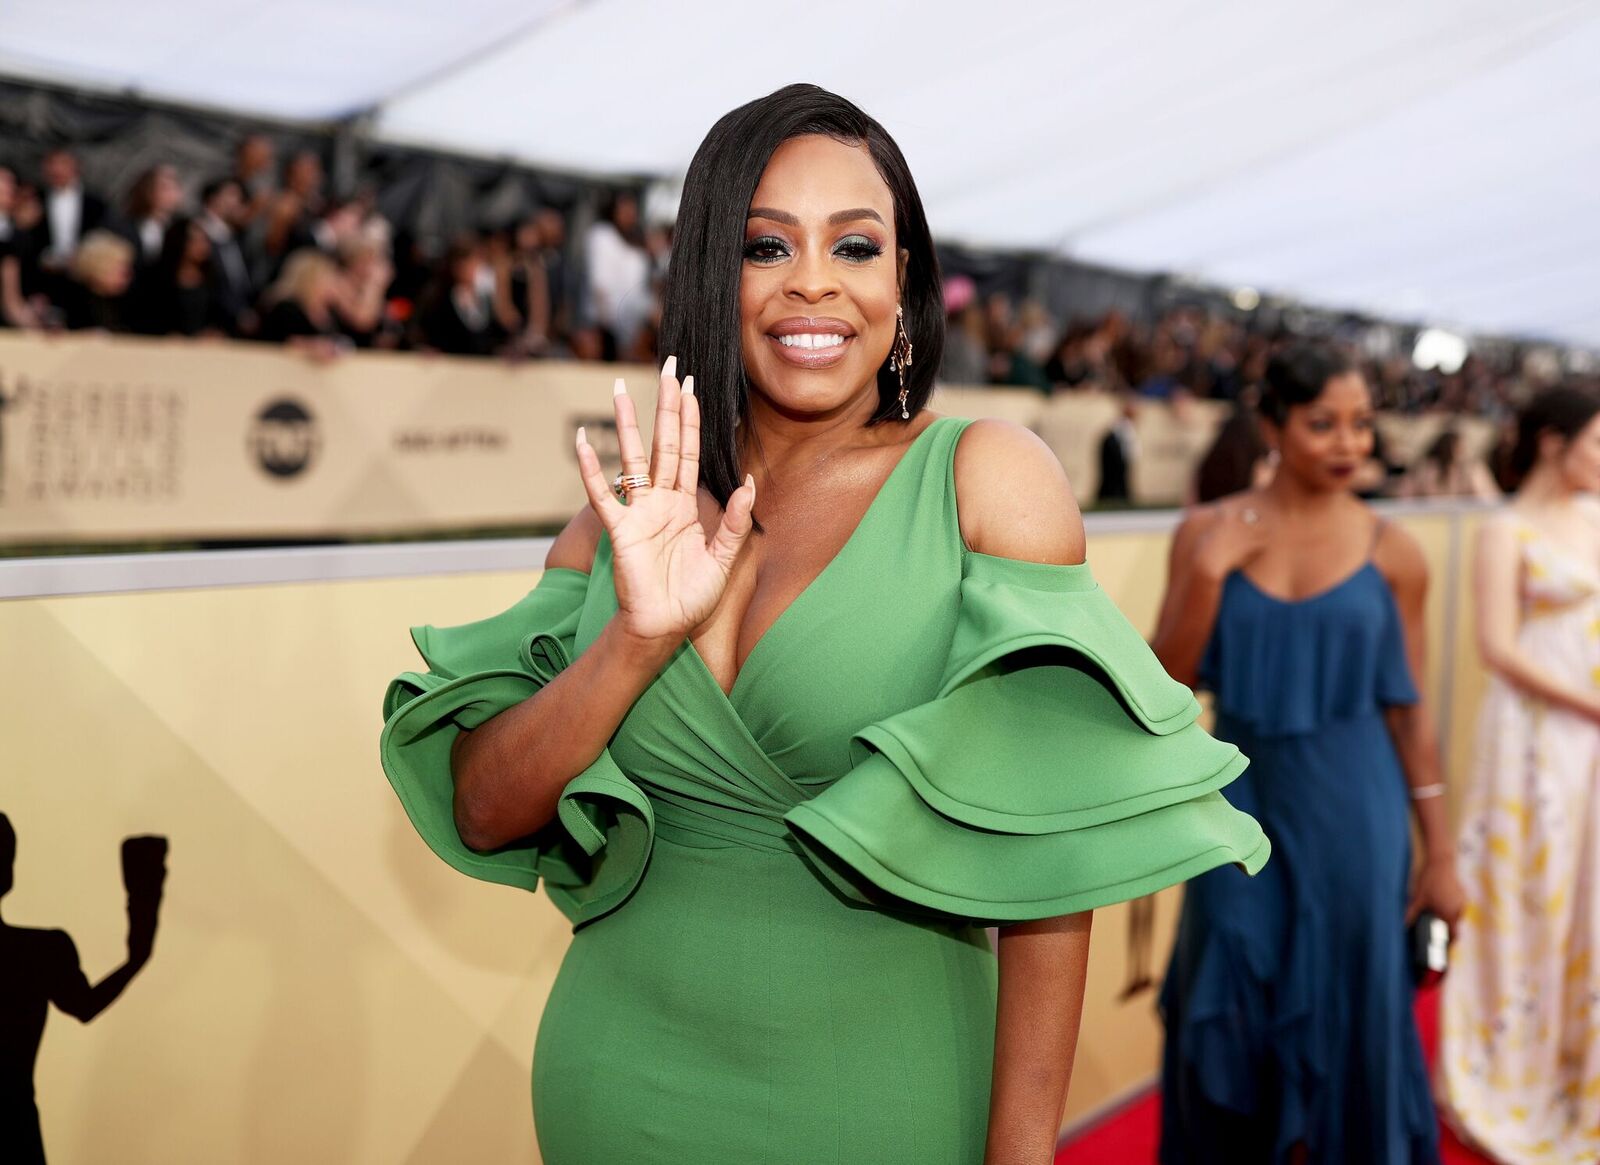 Actor Niecy Nash attends the 24th Annual Screen Actors Guild Awards at The Shrine Auditorium on January 21, 2018 | Photo: Getty Images